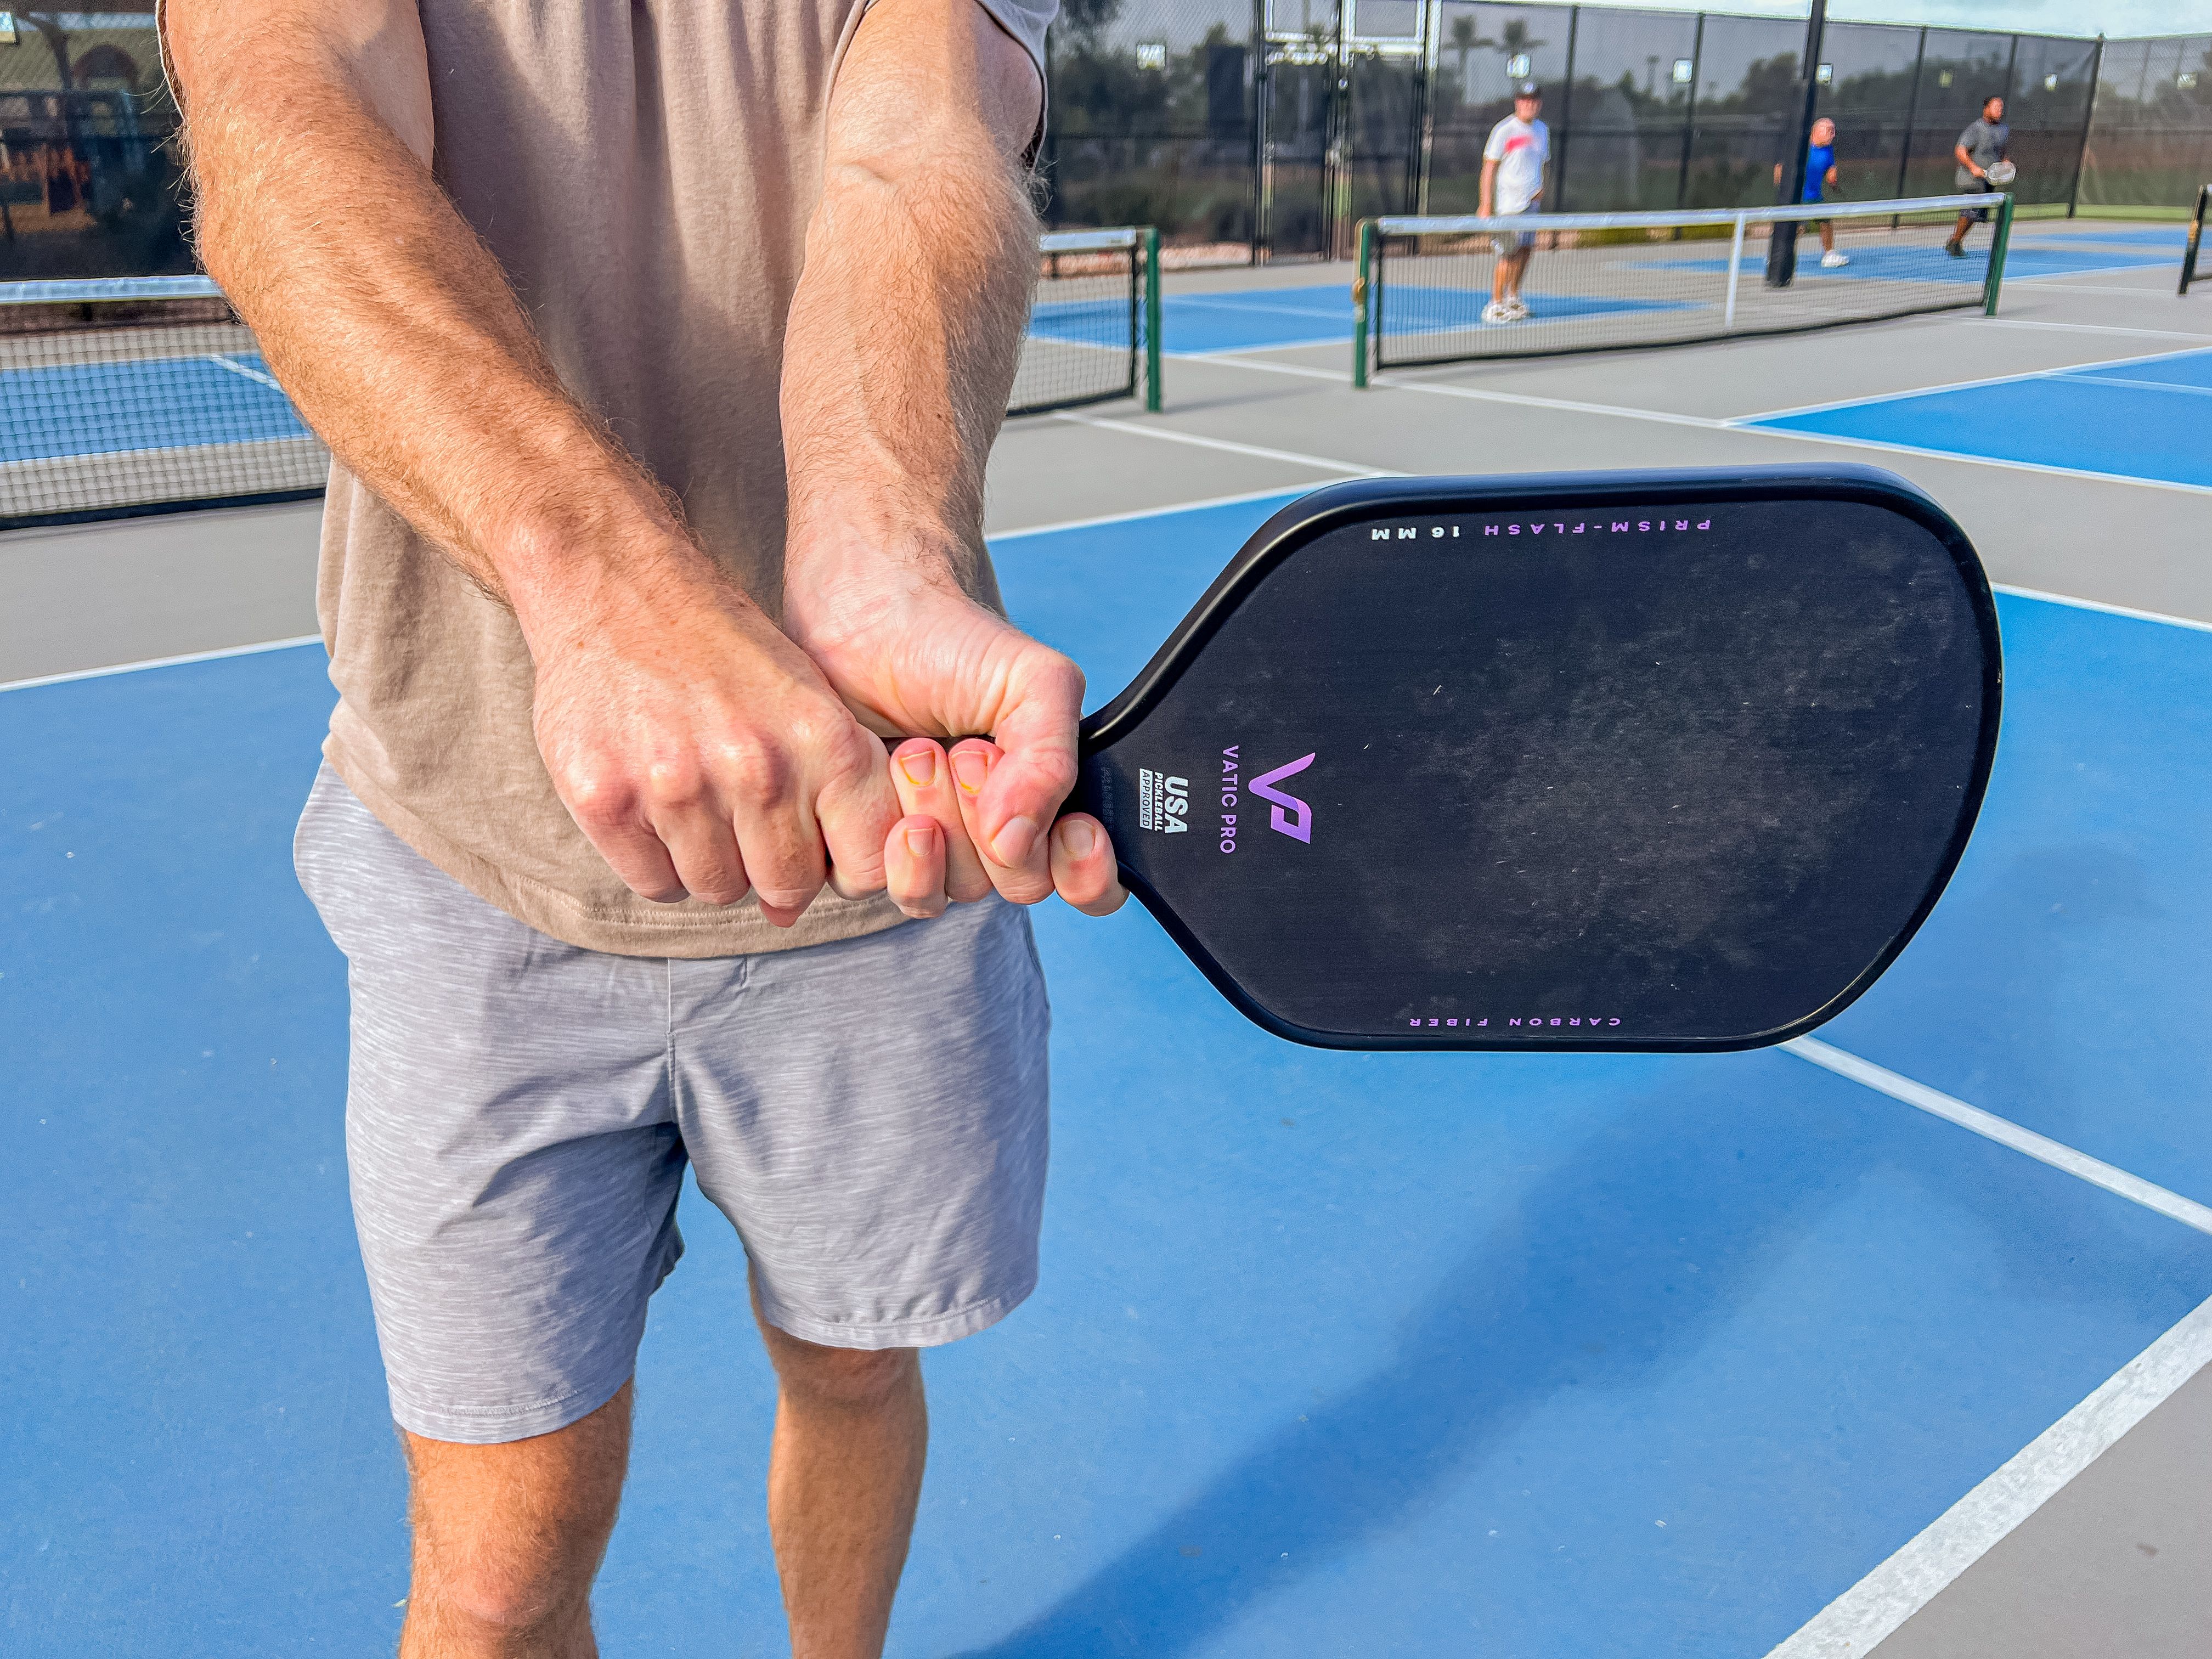 Best Pickleball Paddles to Improve Game: Joola, CRBN, Legacy, Selkirk  Review - Bloomberg